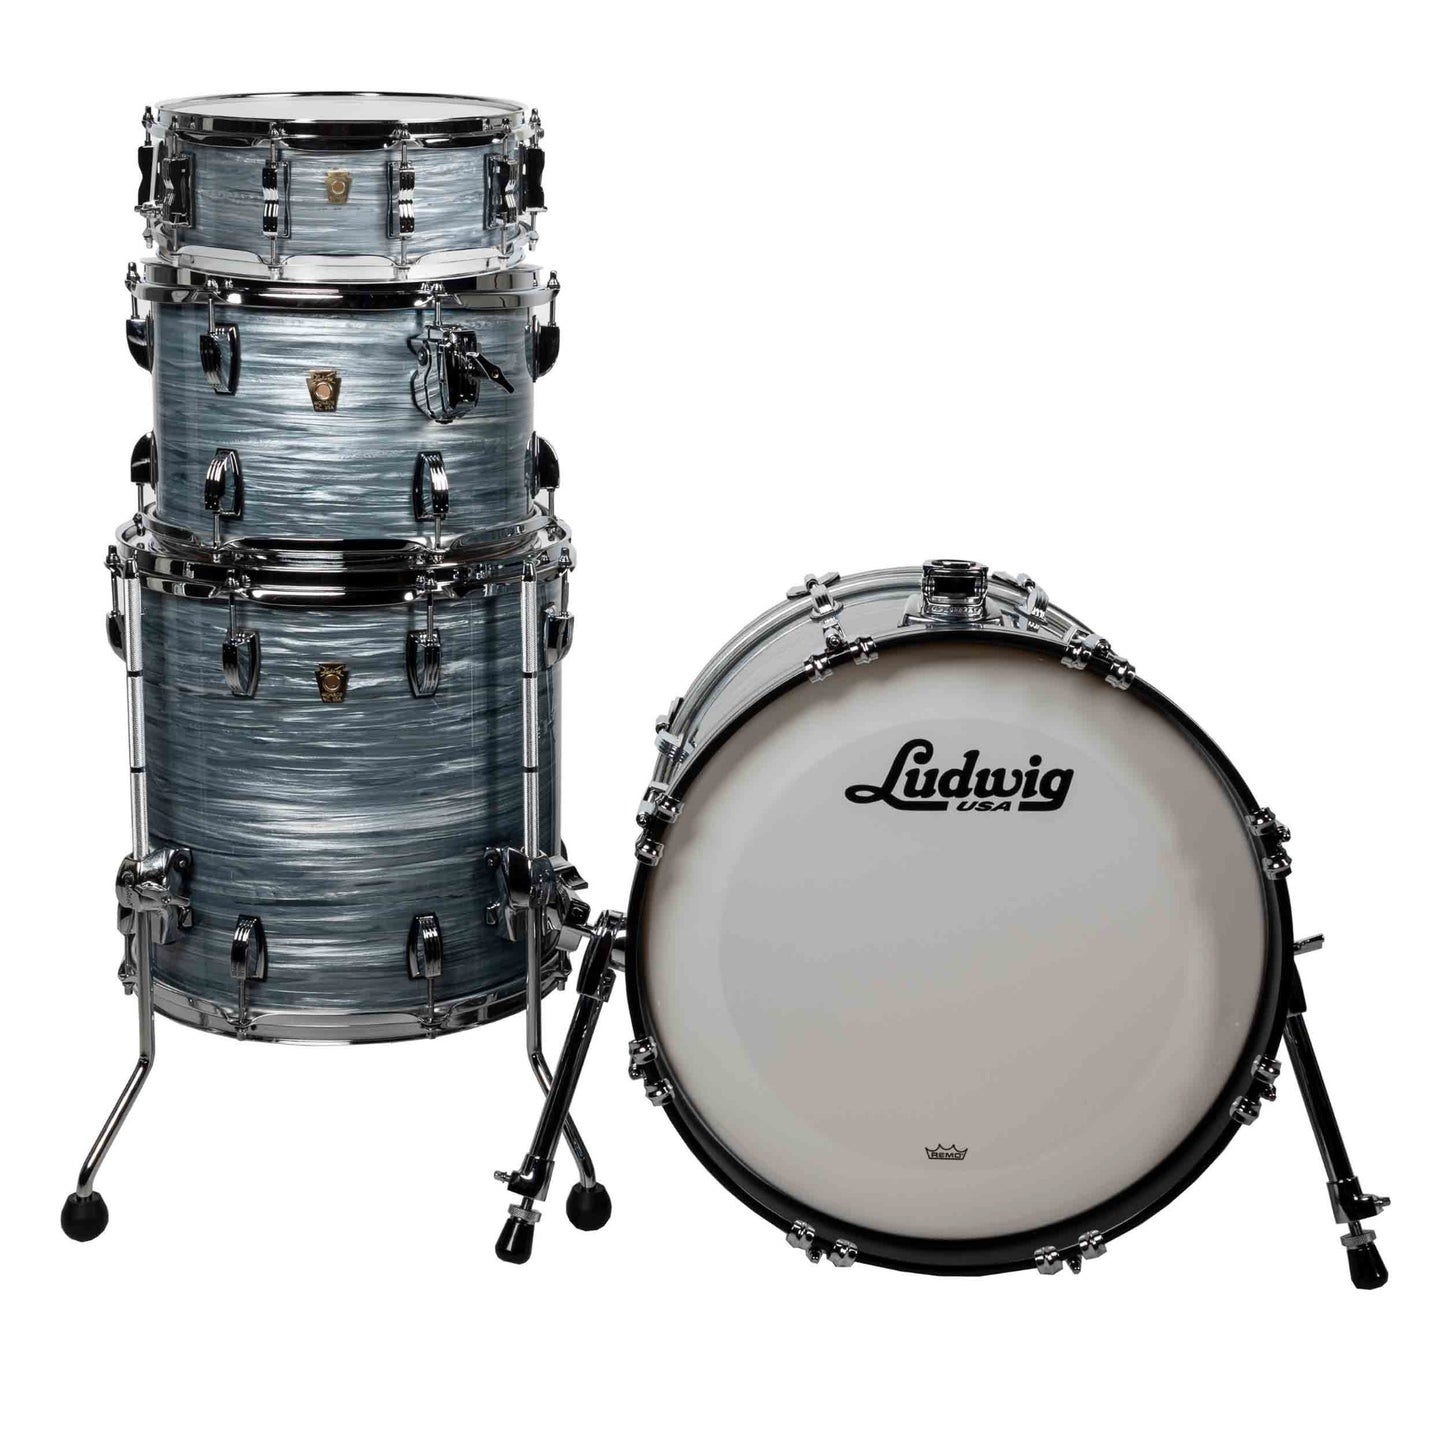 Ludwig Classic Maple 4-Piece Jazzette Kit - Vintage Blue Oyster